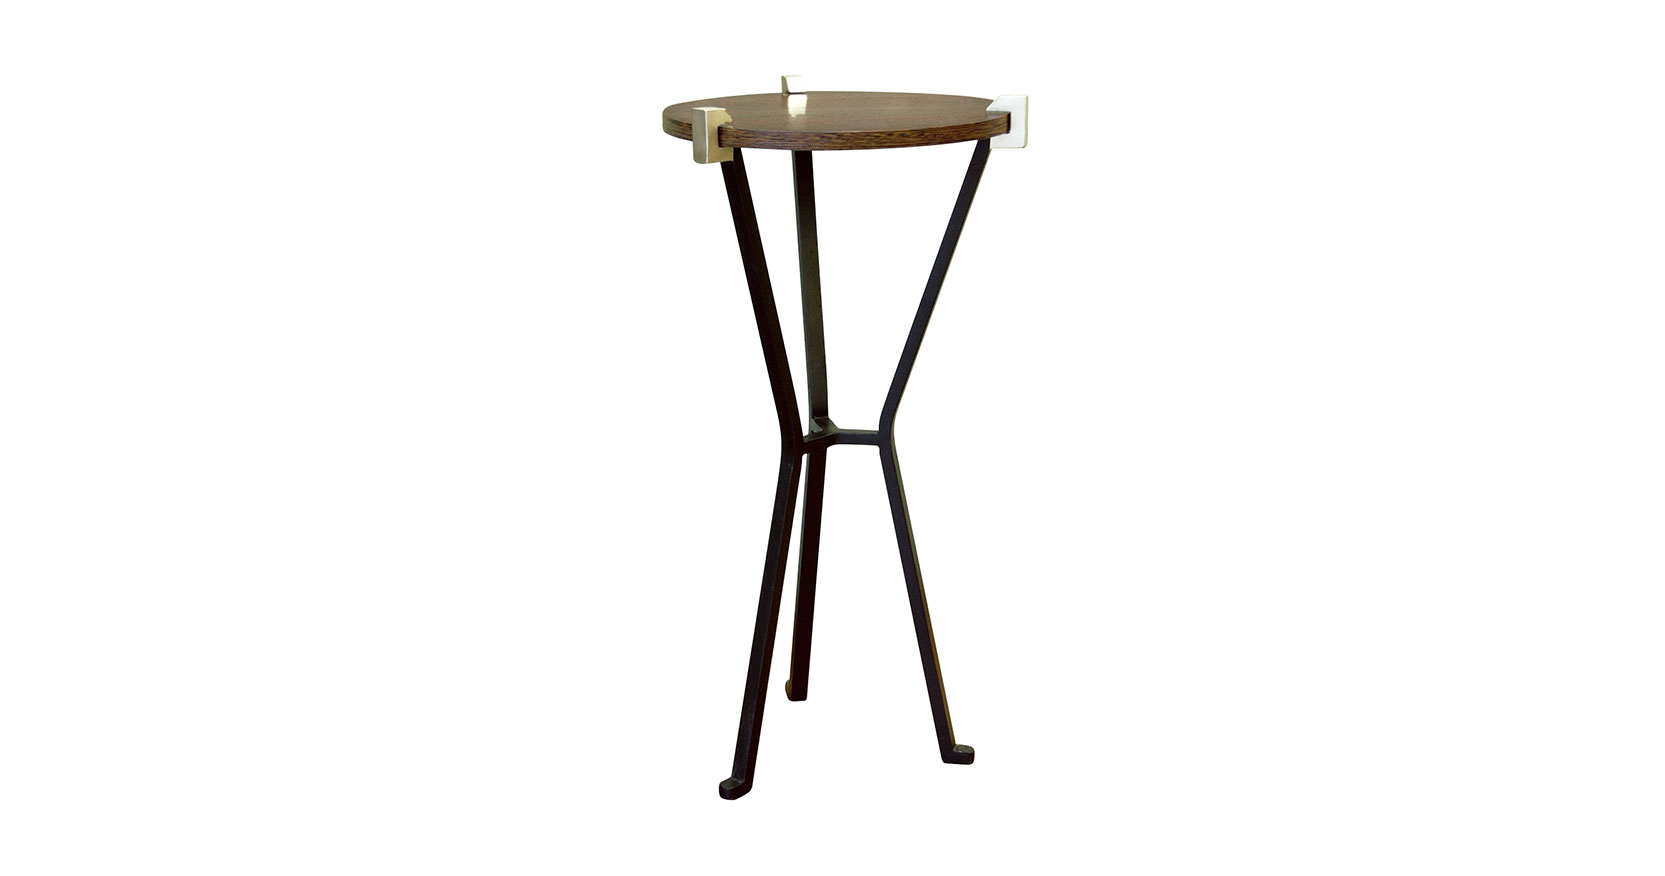 Garouste Bonetti, small round tripod side table with structure in rectangular section black wrought iron. The wooden top is held by stylised sculptural gilded hooks